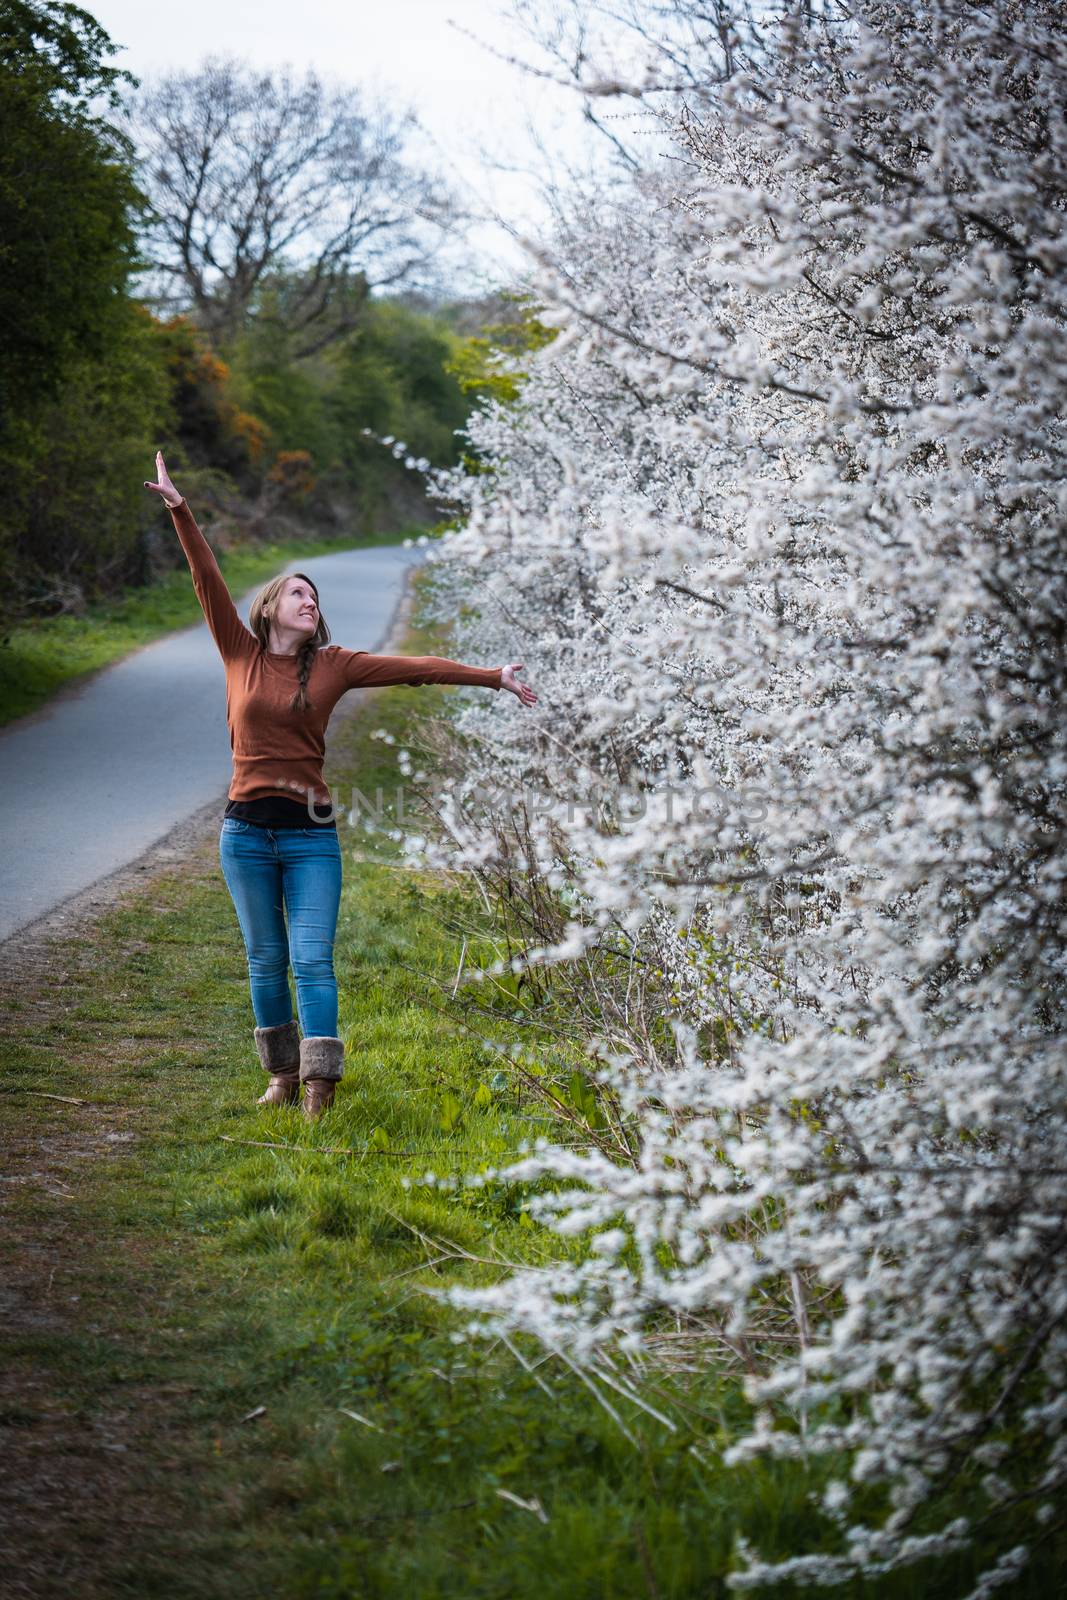 Woman by a Cherry Blossom Tree by samULvisuals